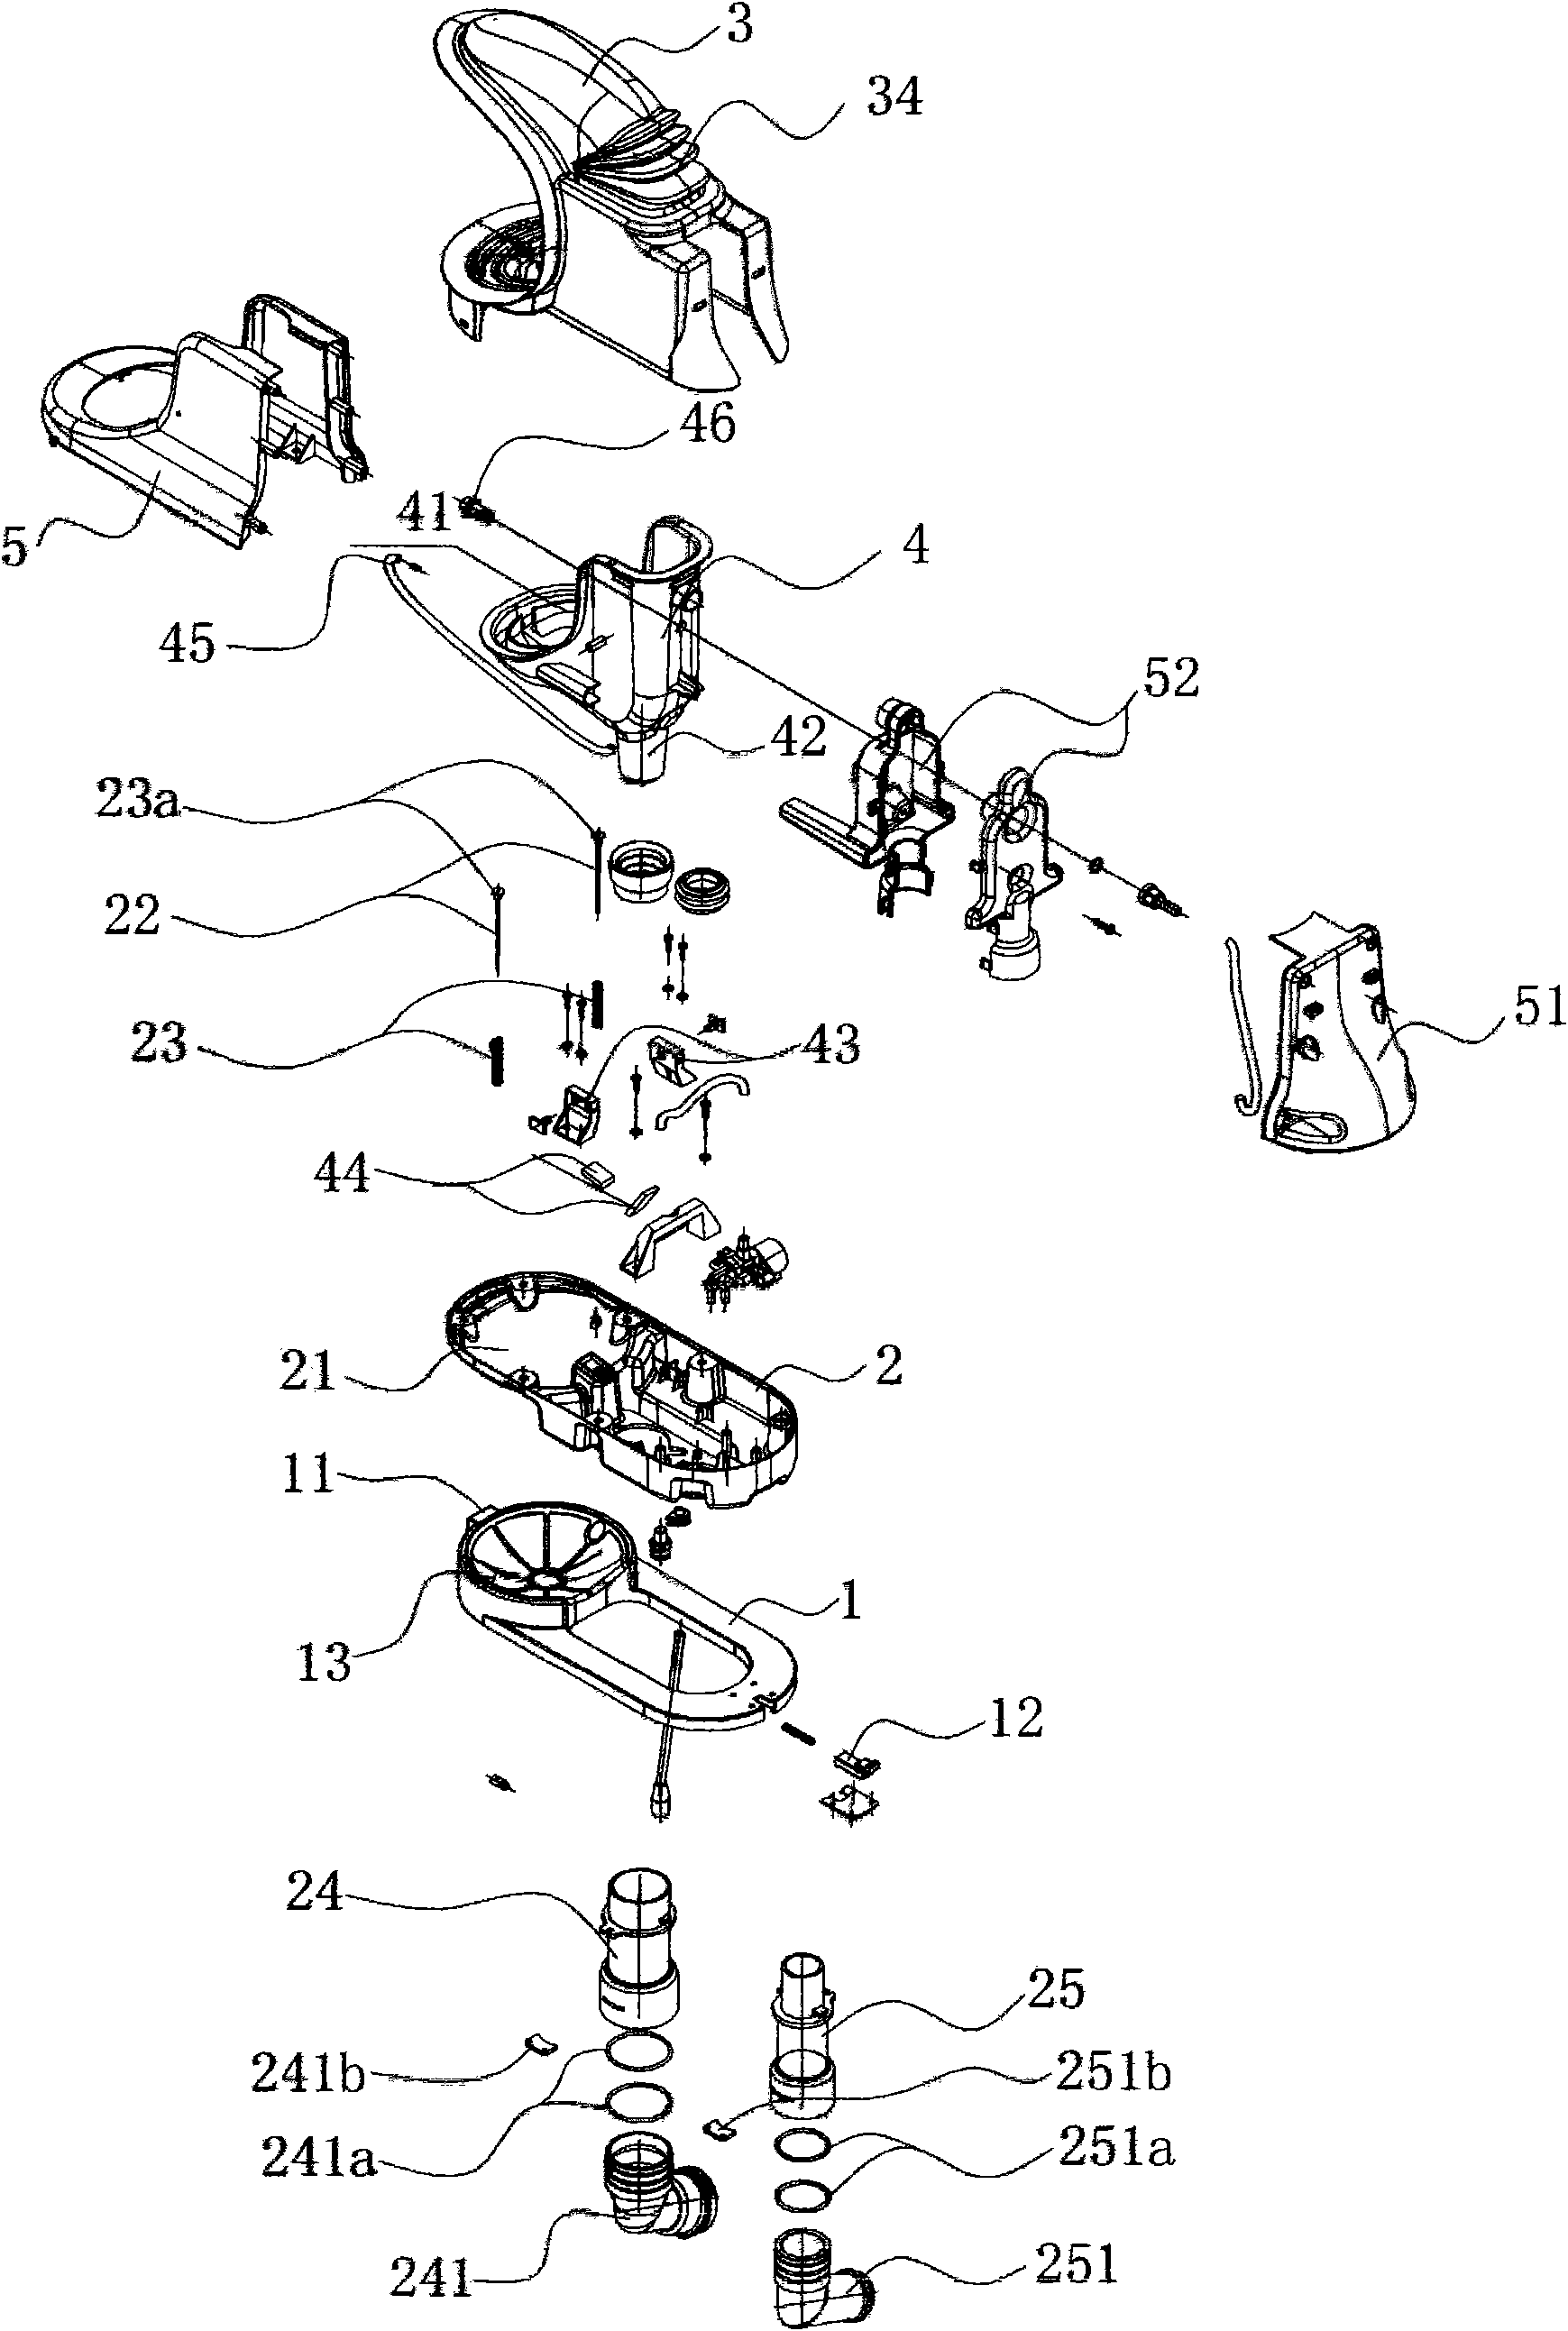 Sucking seat assembly of automatic care bed